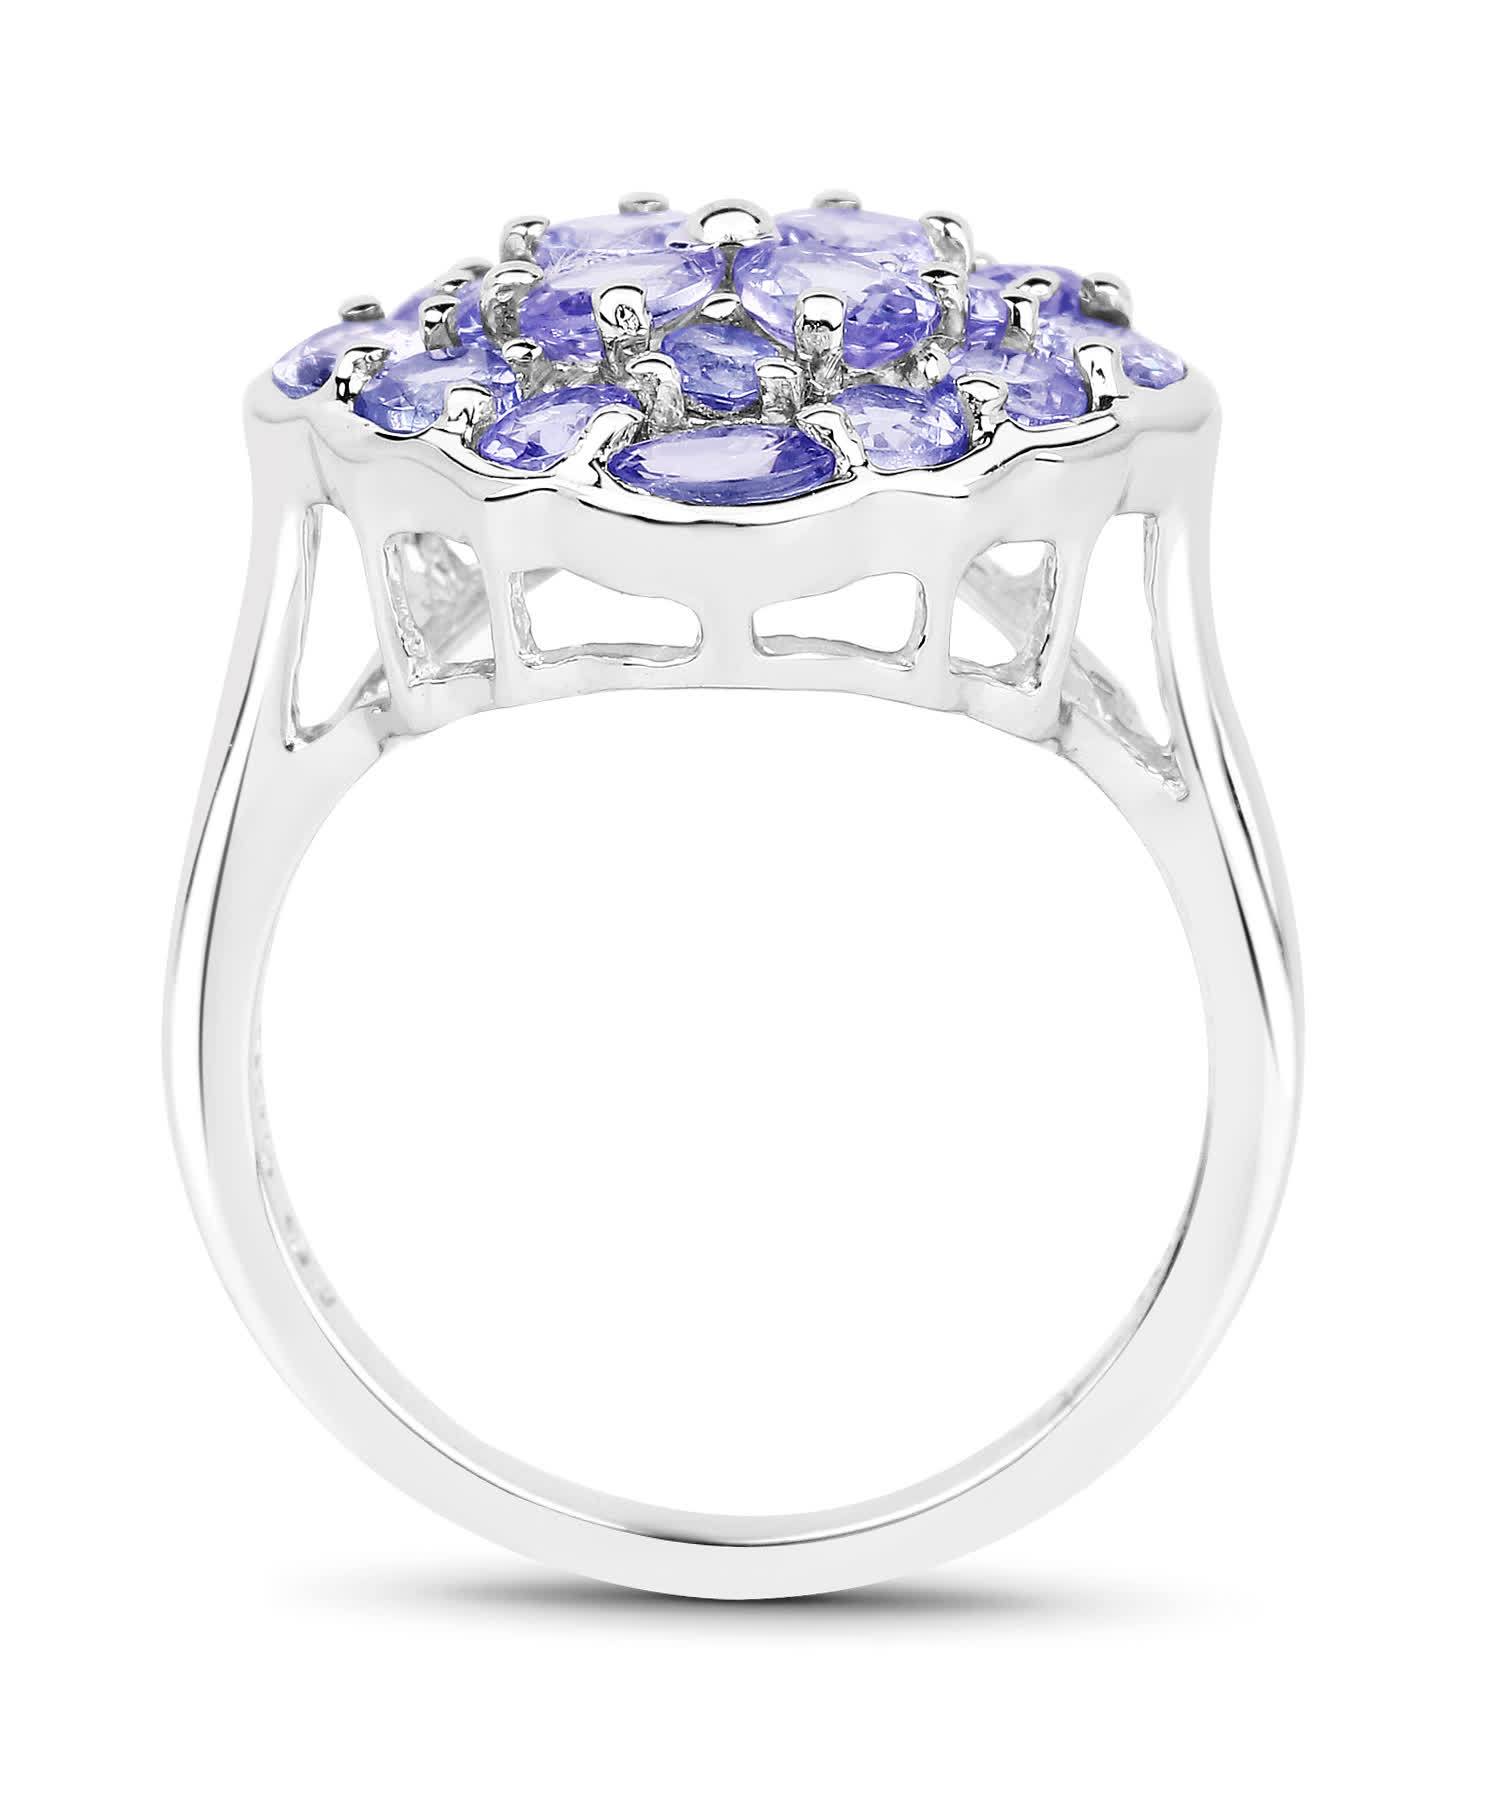 2.44ctw Natural Tanzanite Rhodium Plated 925 Sterling Silver Cluster Cocktail Ring View 2